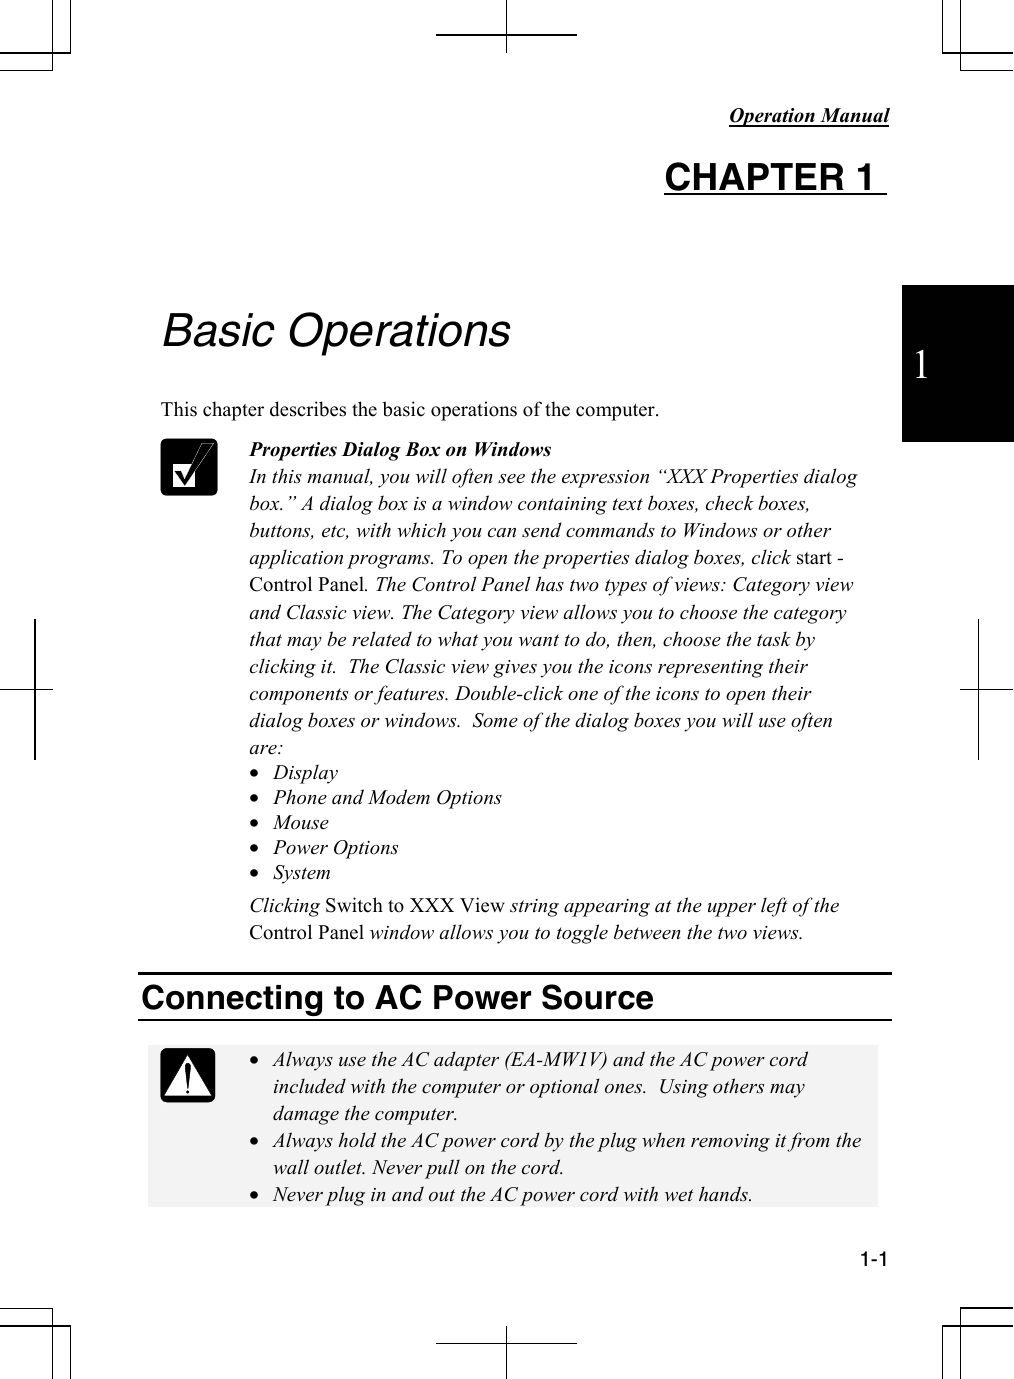           Operation Manual  1-1  1 CHAPTER 1     Basic Operations  This chapter describes the basic operations of the computer.  Properties Dialog Box on Windows In this manual, you will often see the expression “XXX Properties dialog box.” A dialog box is a window containing text boxes, check boxes, buttons, etc, with which you can send commands to Windows or other application programs. To open the properties dialog boxes, click start - Control Panel. The Control Panel has two types of views: Category view and Classic view. The Category view allows you to choose the category that may be related to what you want to do, then, choose the task by clicking it.  The Classic view gives you the icons representing their components or features. Double-click one of the icons to open their dialog boxes or windows.  Some of the dialog boxes you will use often are: • Display  • Phone and Modem Options • Mouse • Power Options • System Clicking Switch to XXX View string appearing at the upper left of the Control Panel window allows you to toggle between the two views.  Connecting to AC Power Source    • Always use the AC adapter (EA-MW1V) and the AC power cord included with the computer or optional ones.  Using others may damage the computer. • Always hold the AC power cord by the plug when removing it from the wall outlet. Never pull on the cord.  • Never plug in and out the AC power cord with wet hands.  